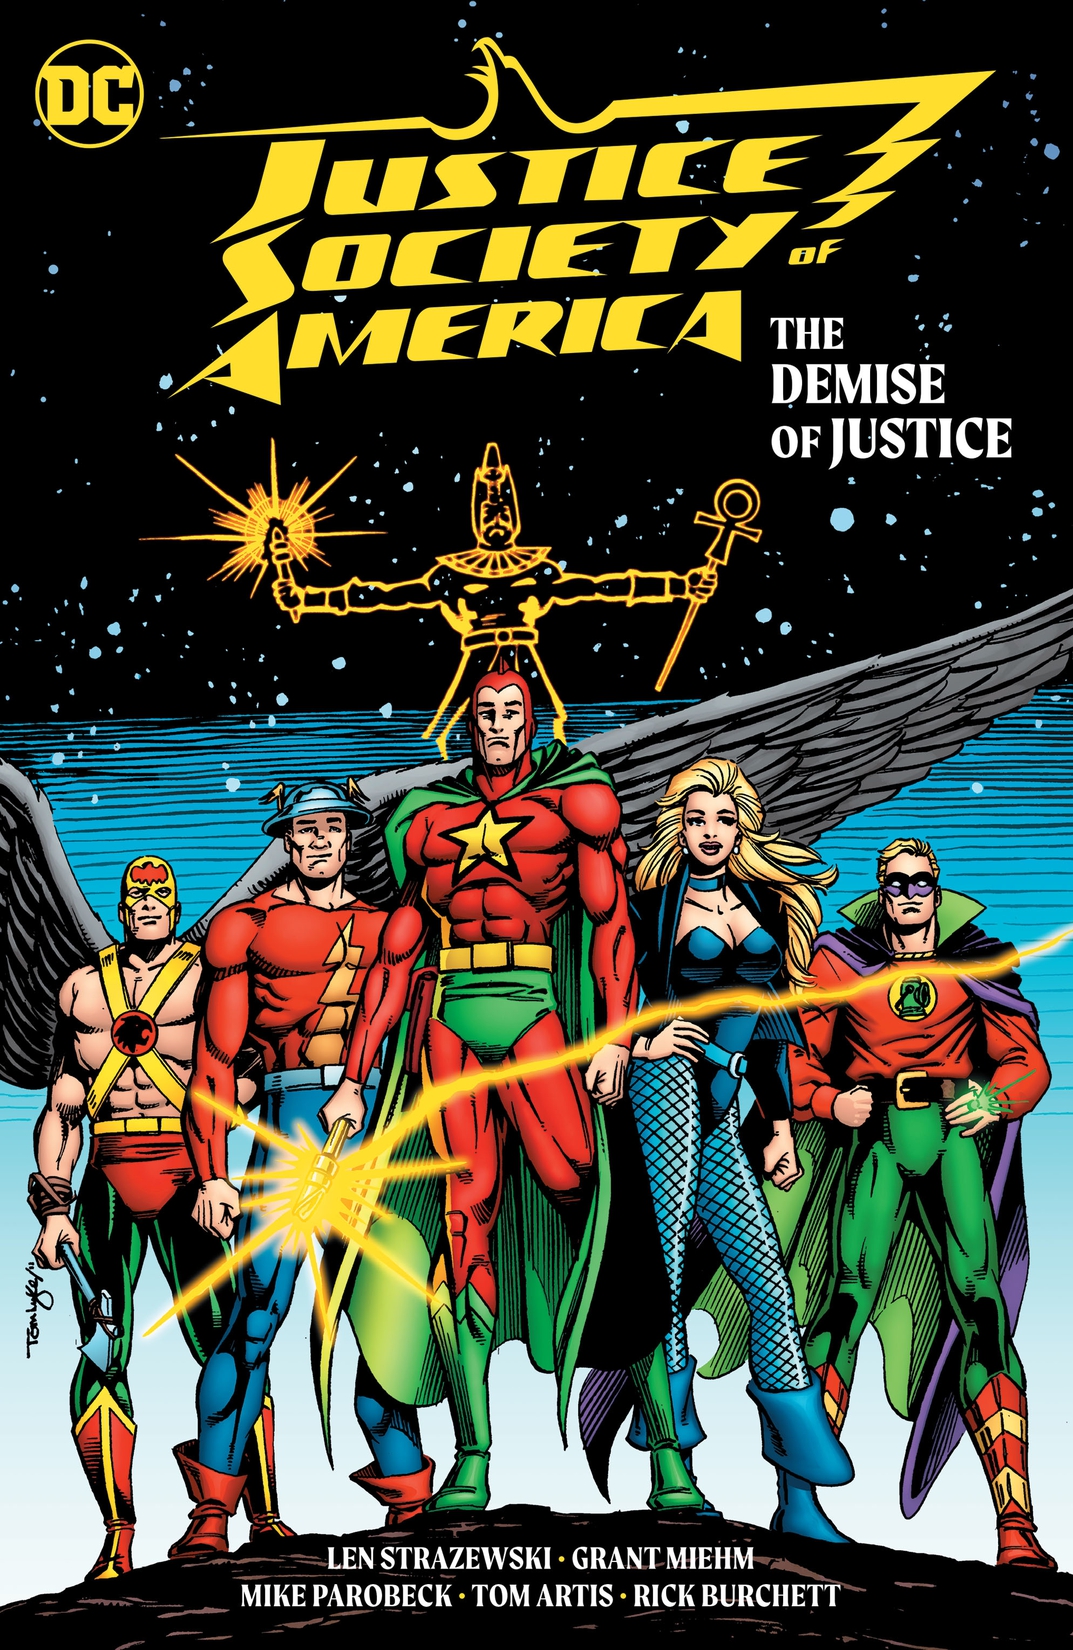 Justice Society of America: The Demise of Justice preview images